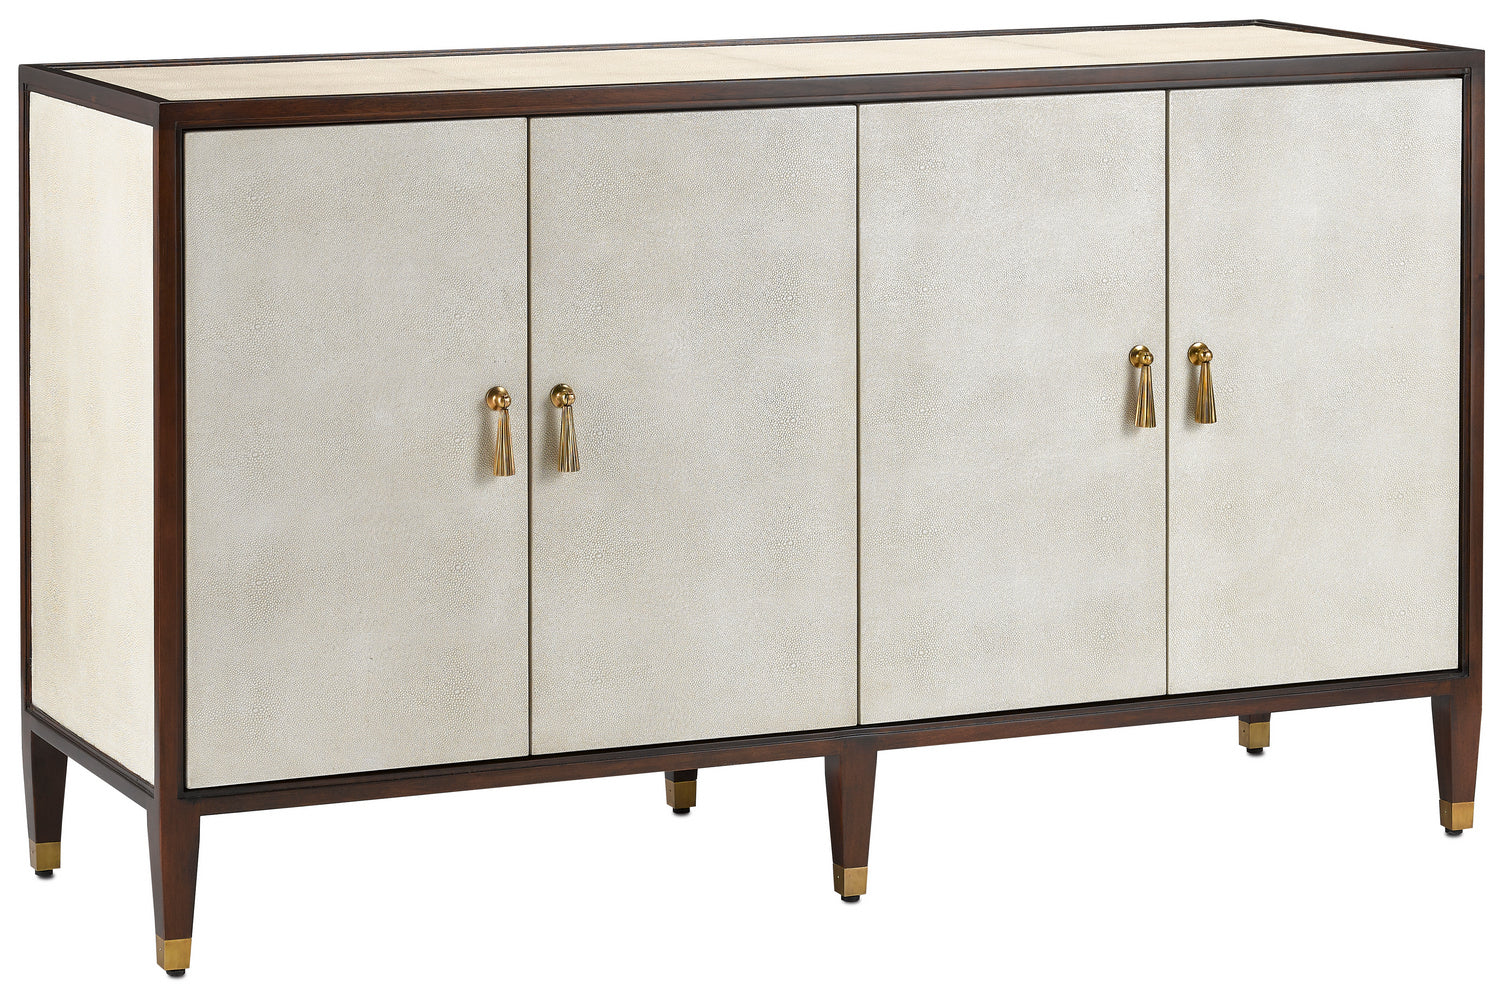 Credenza from the Evie collection in Ivory/Dark Walnut/Brass finish